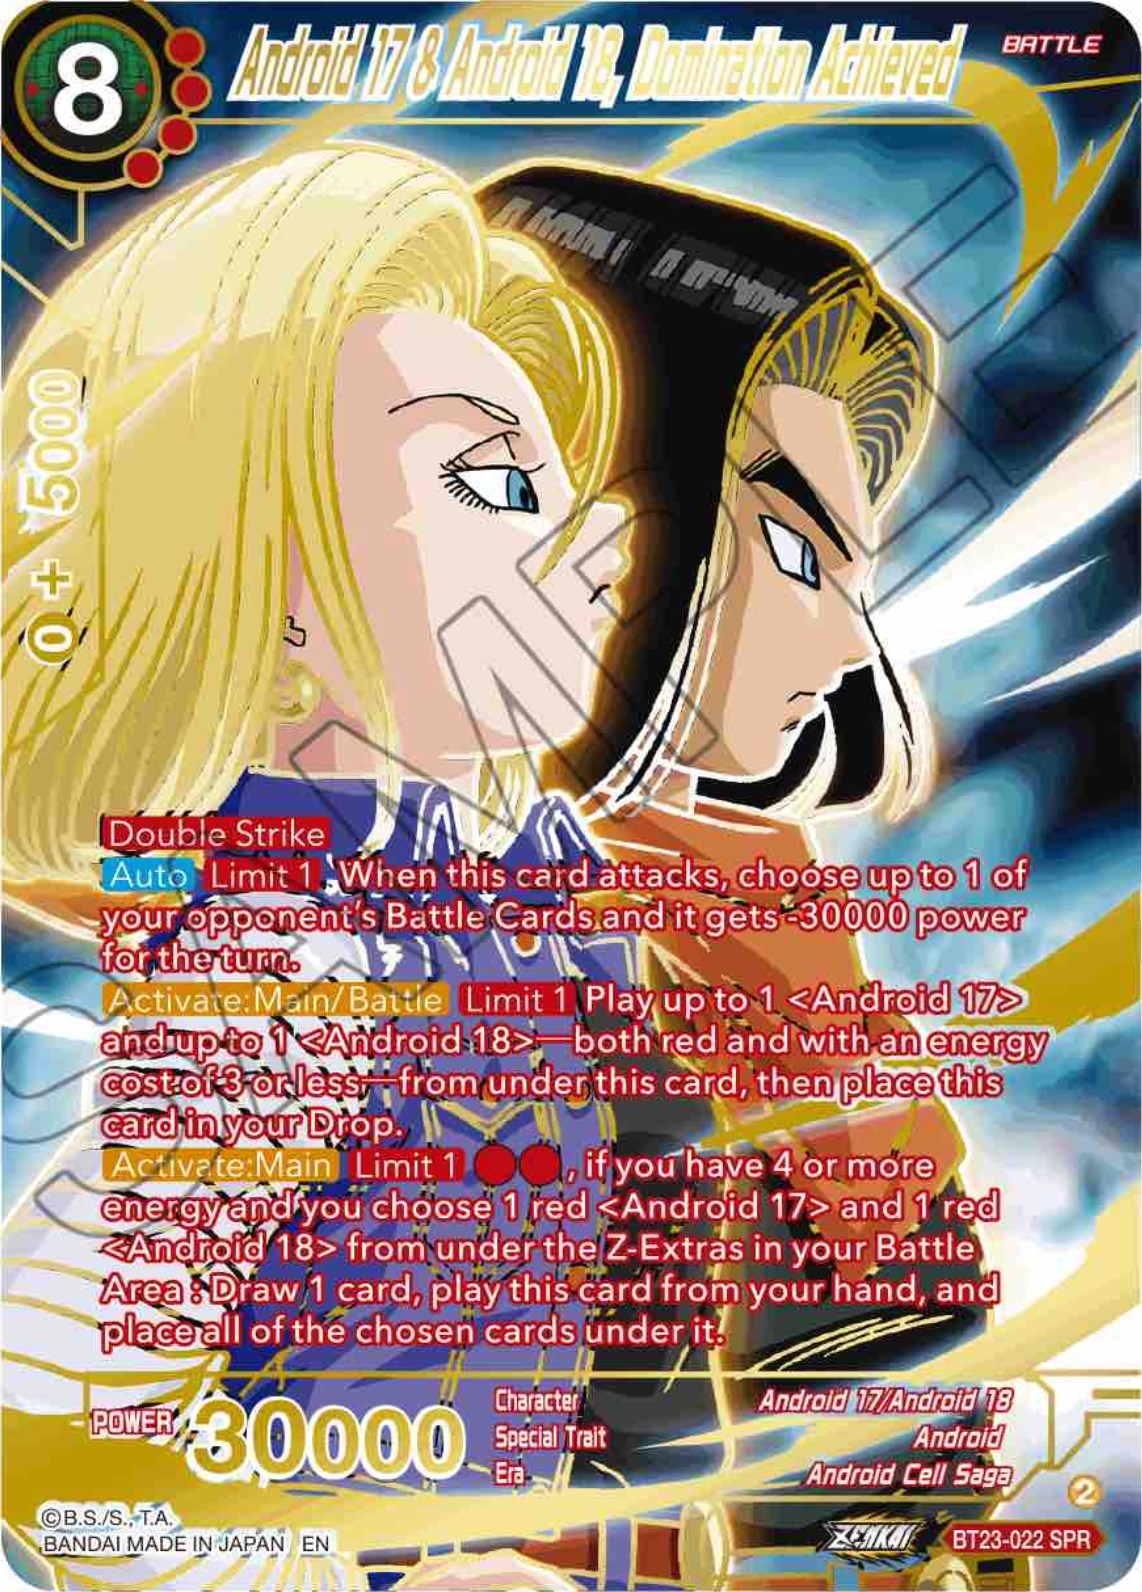 Android 17 & Android 18, Domination Achieved (SPR) (BT23-022) [Perfect Combination] | Amazing Games TCG